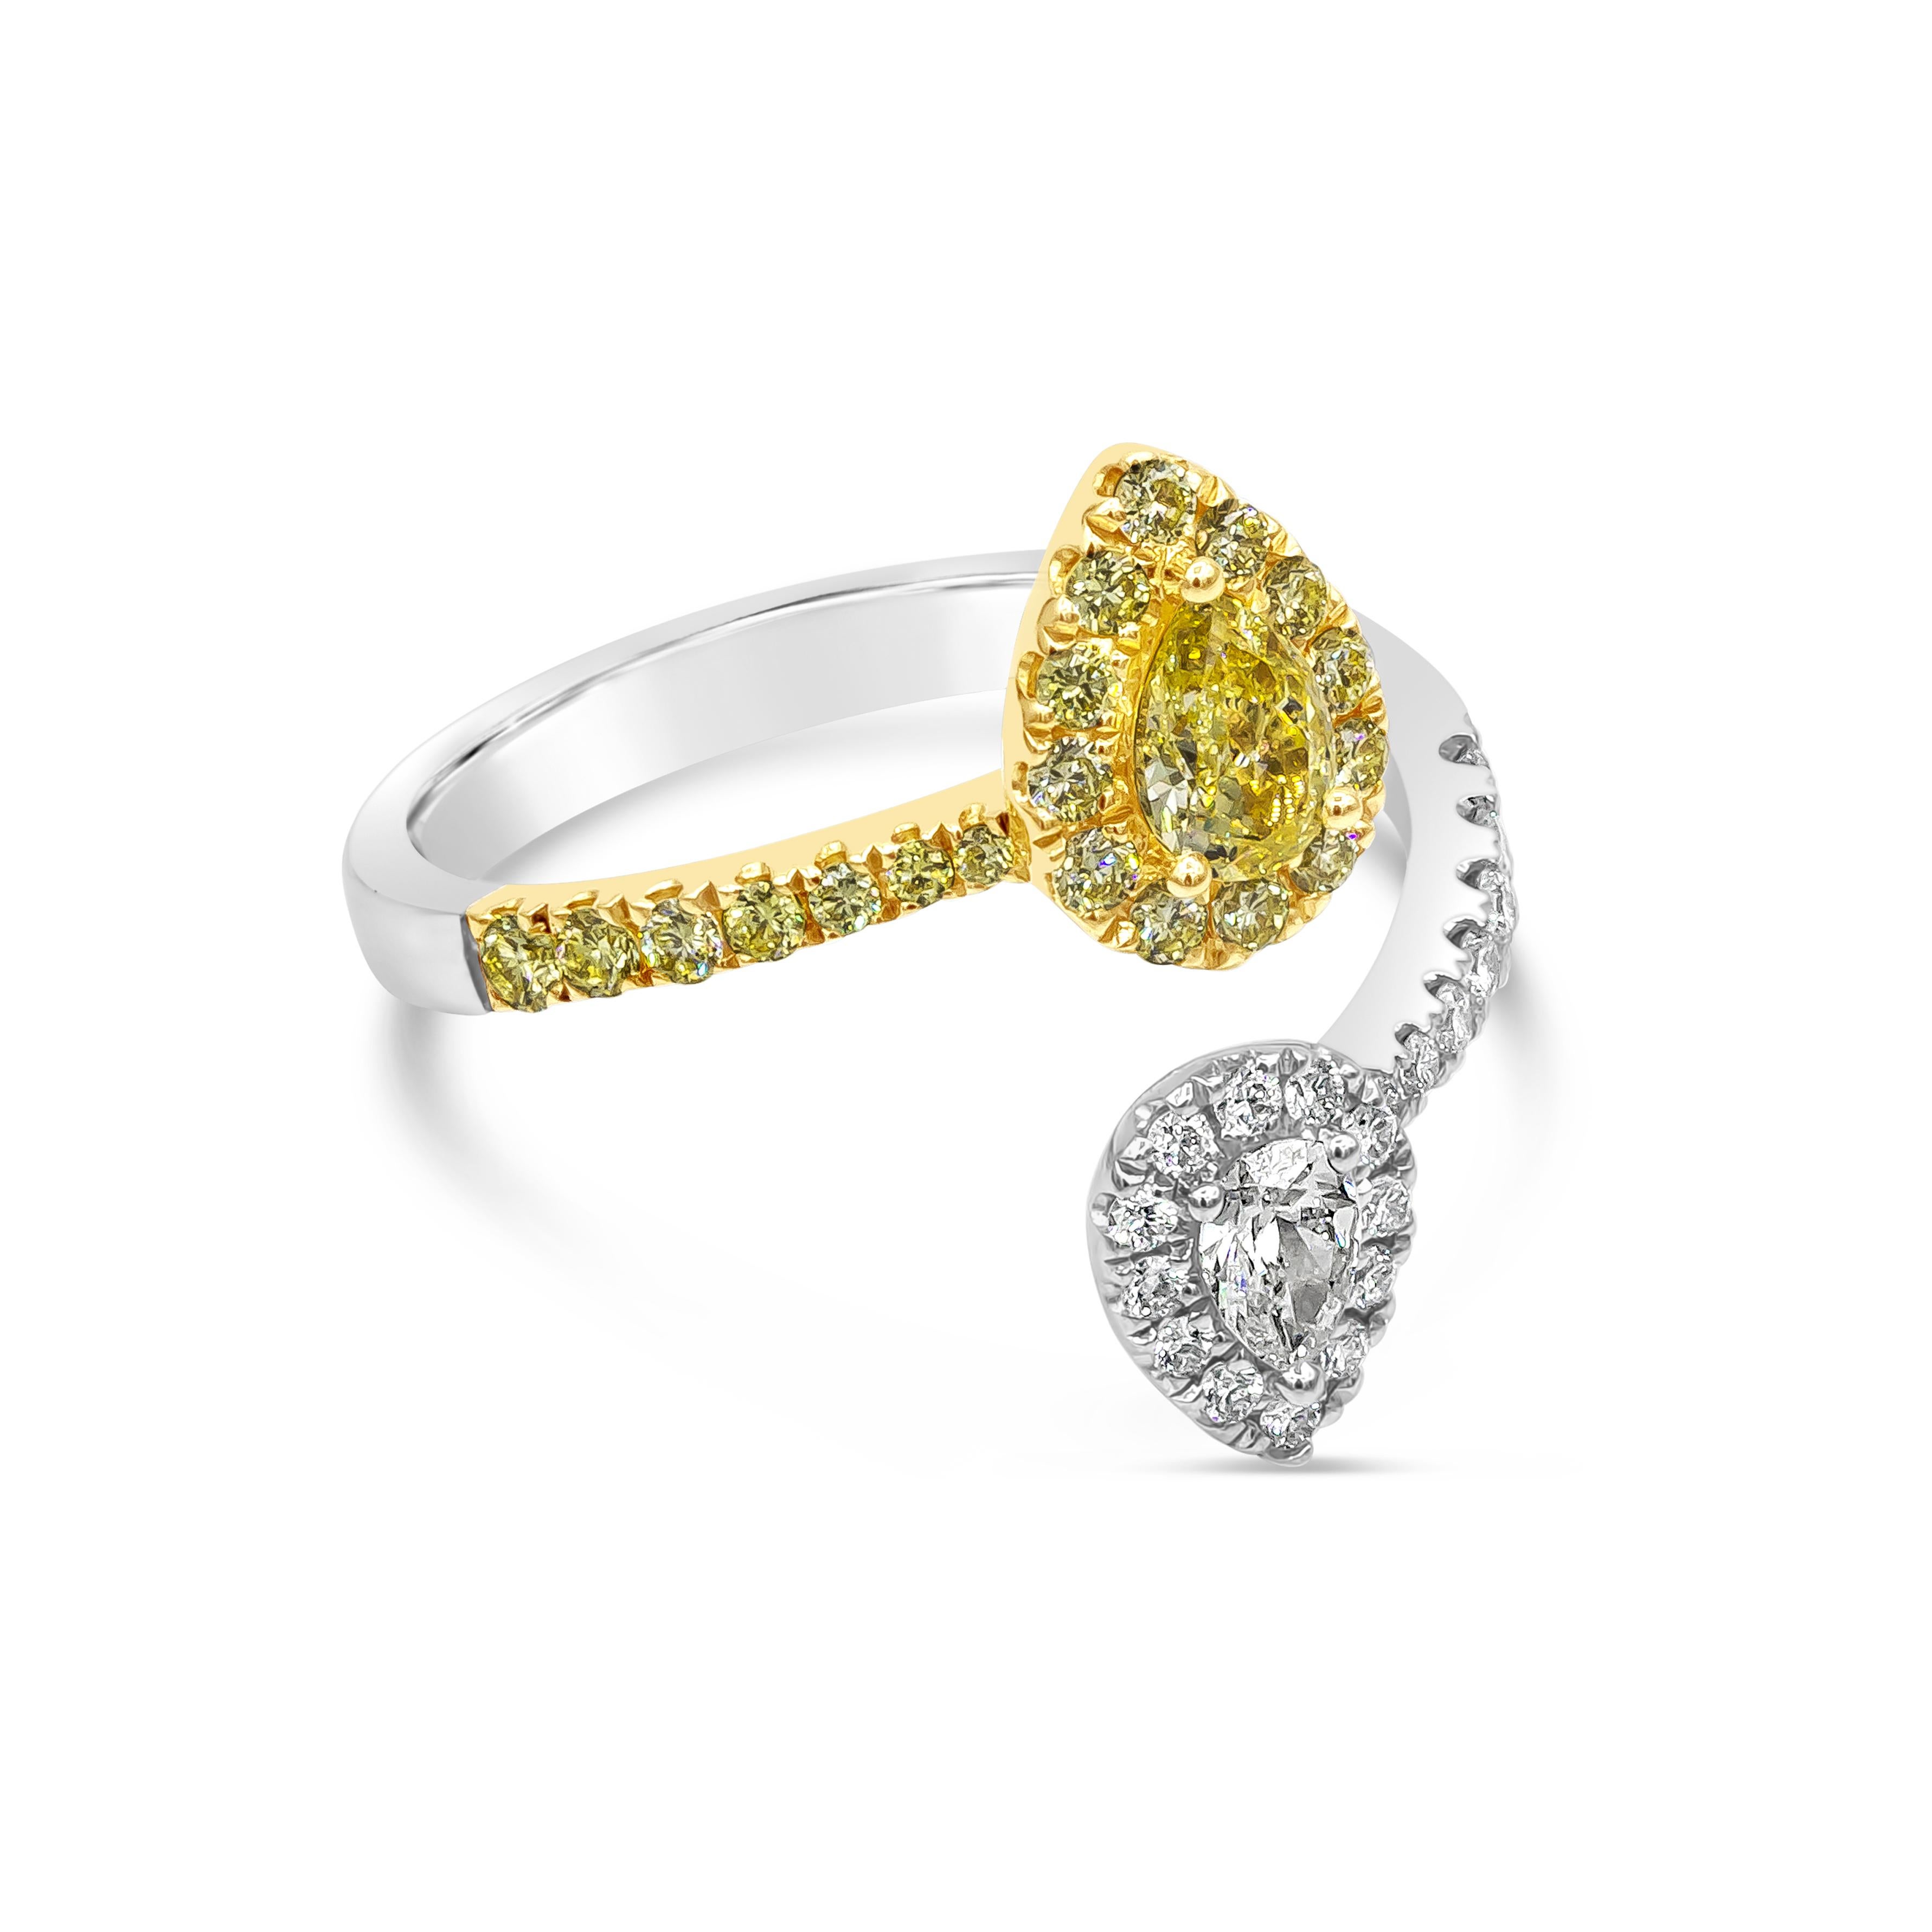 A very chic and fashionable ring showcasing a pear shape yellow diamond surrounded by a row of yellow diamonds, attached to a pear shape white diamond surrounded by white diamonds. Bypass Setting made in 18 karat two tone. Yellow diamonds weigh 0.53